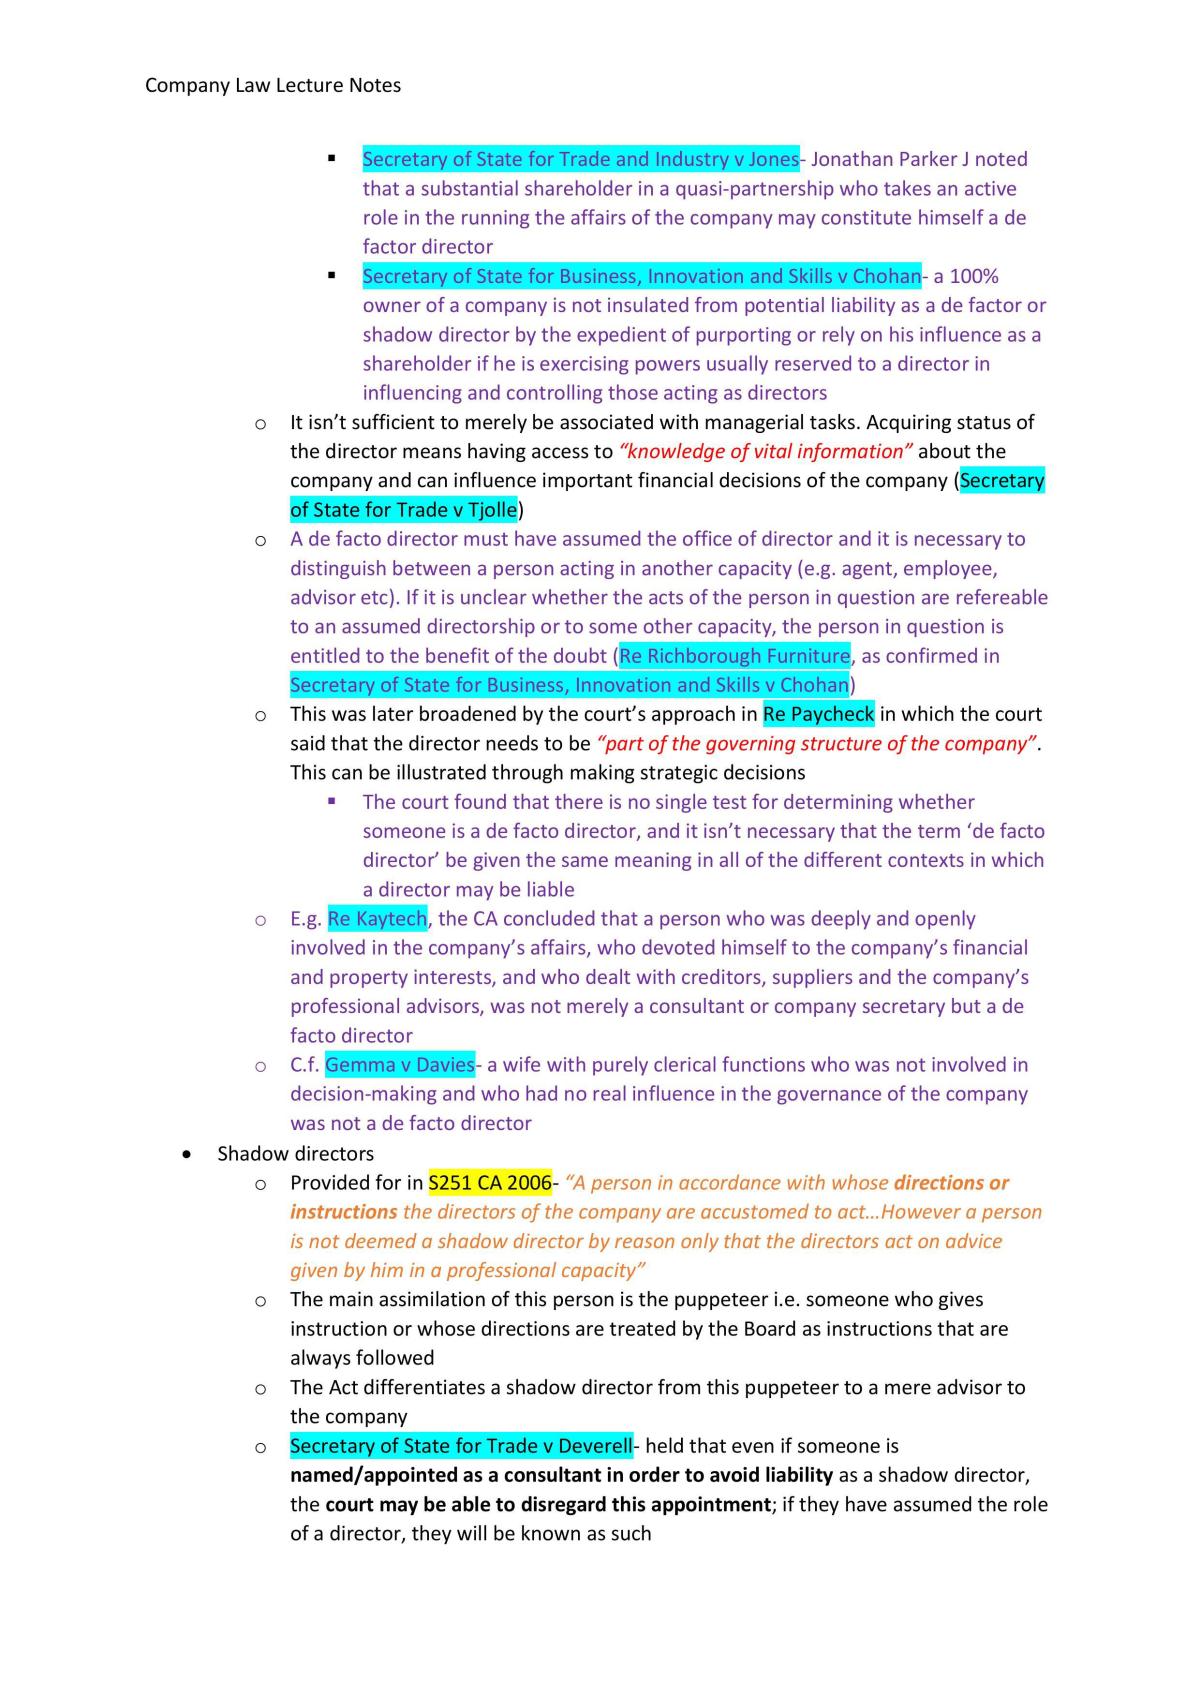 Company Law Notes - Page 55